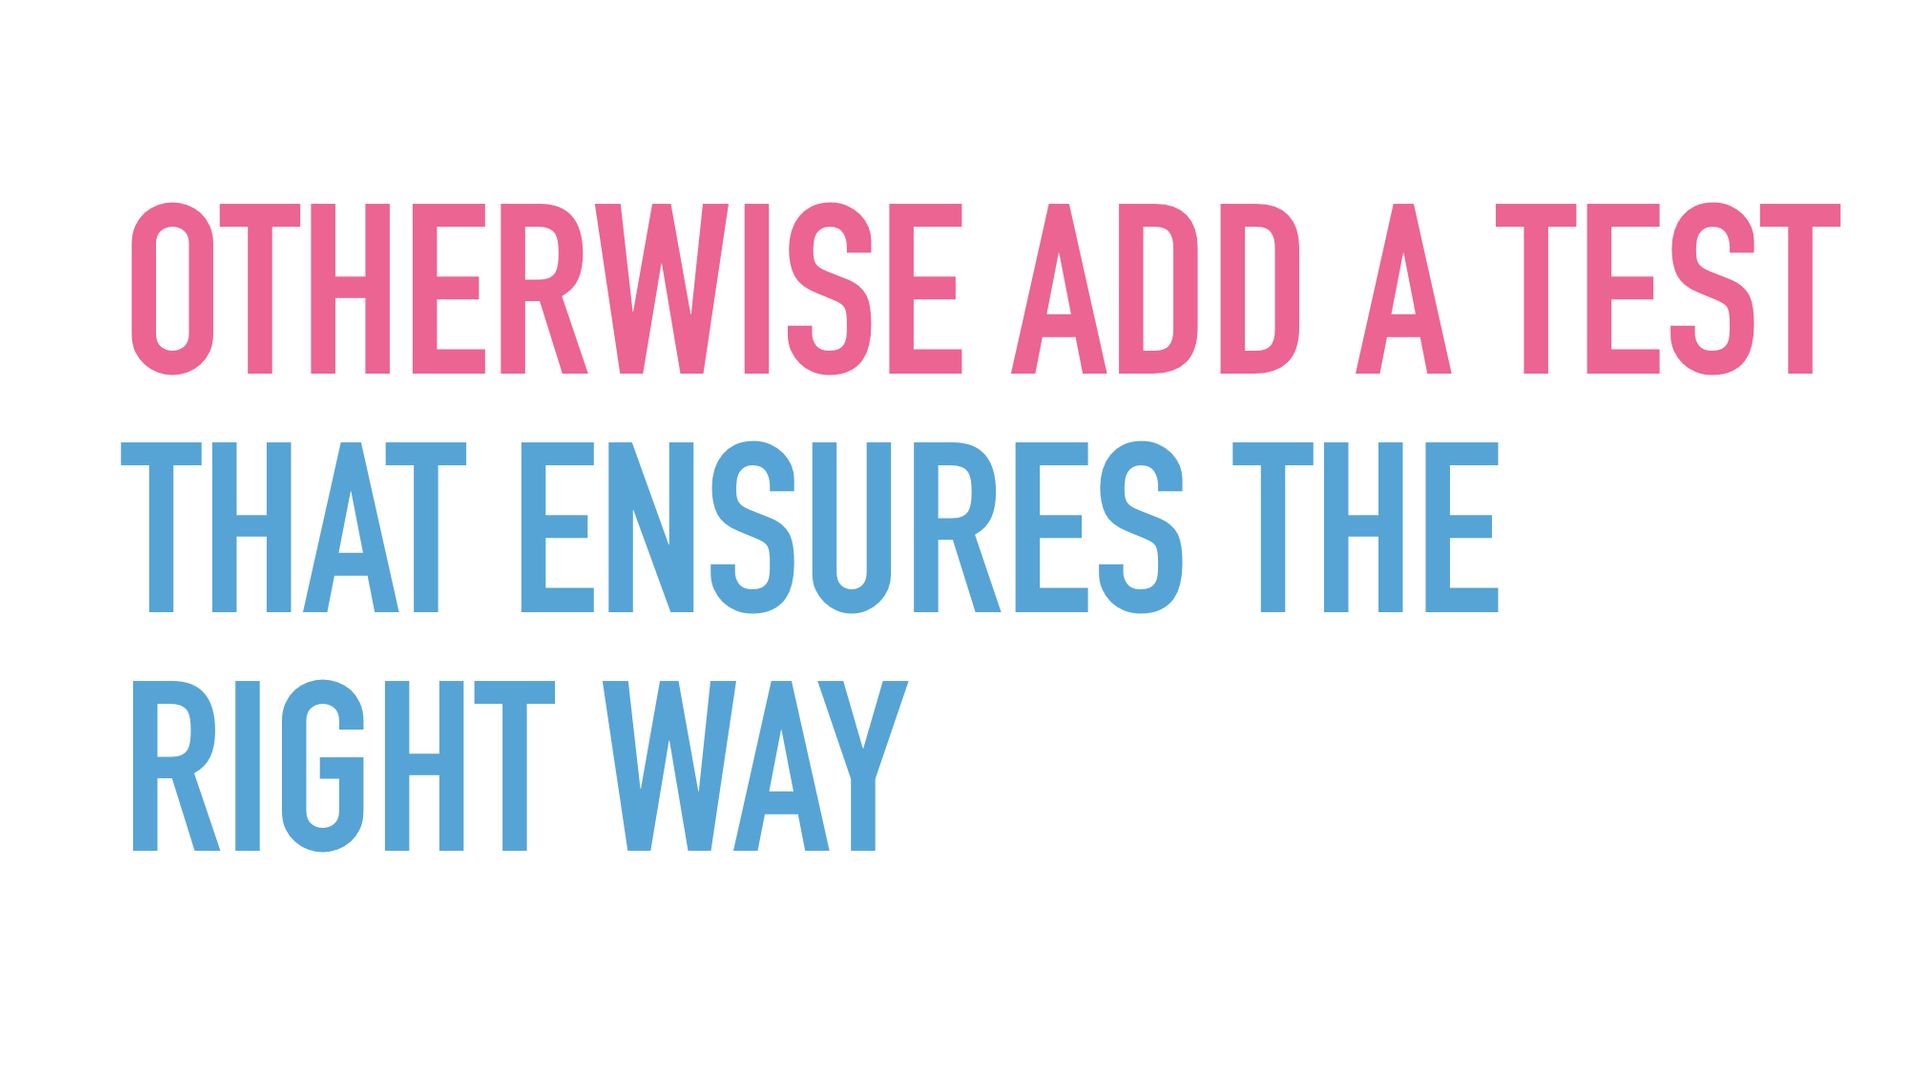 Slide text: Otherwise add a test that ensure the right way,